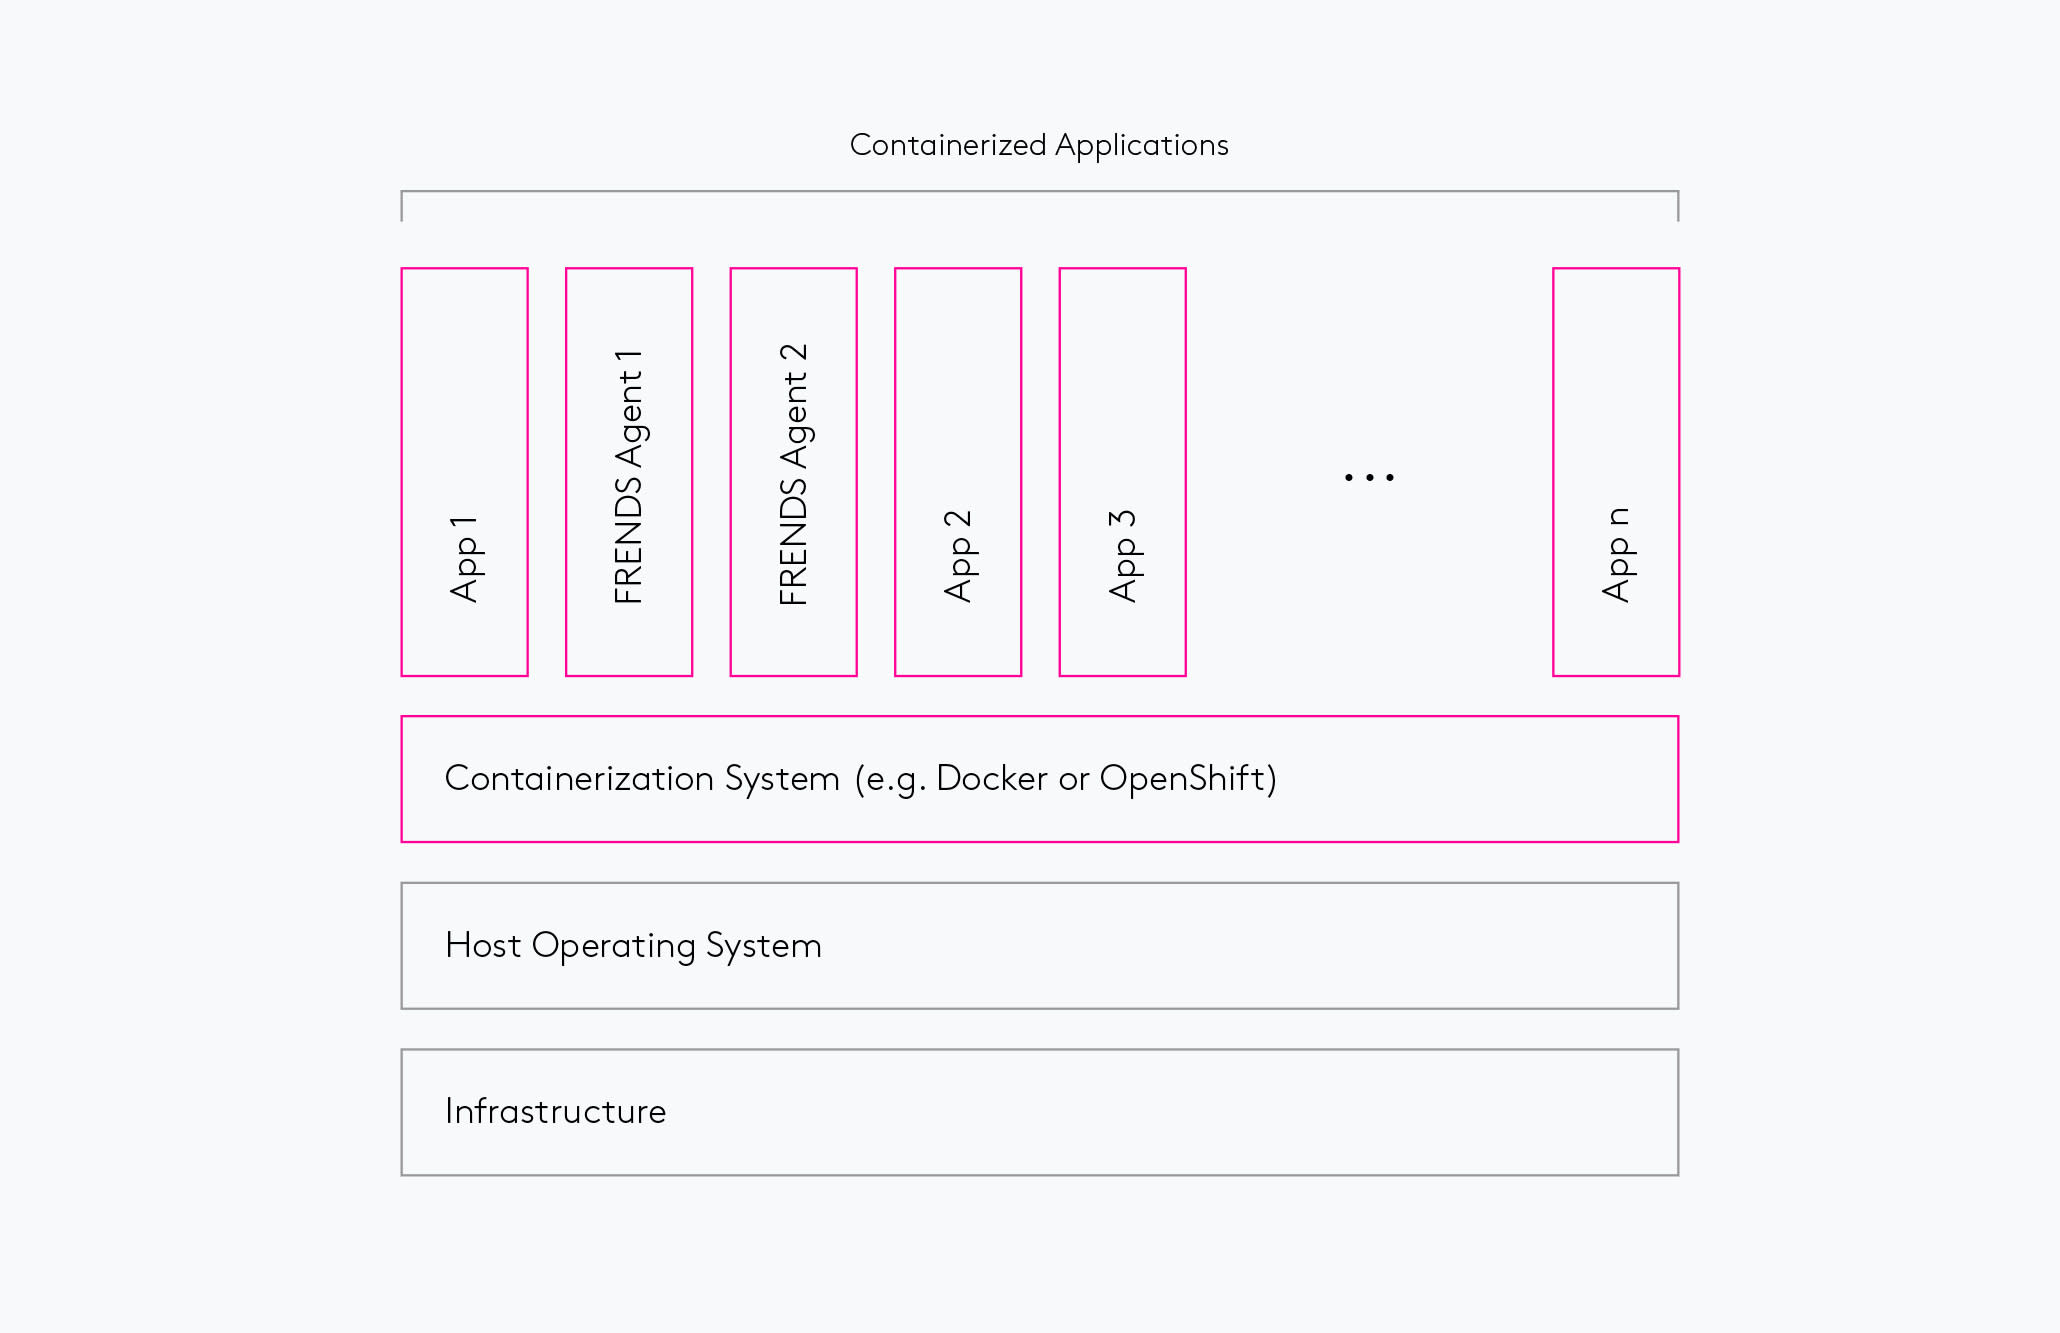 Integration services can be containerized like other applications